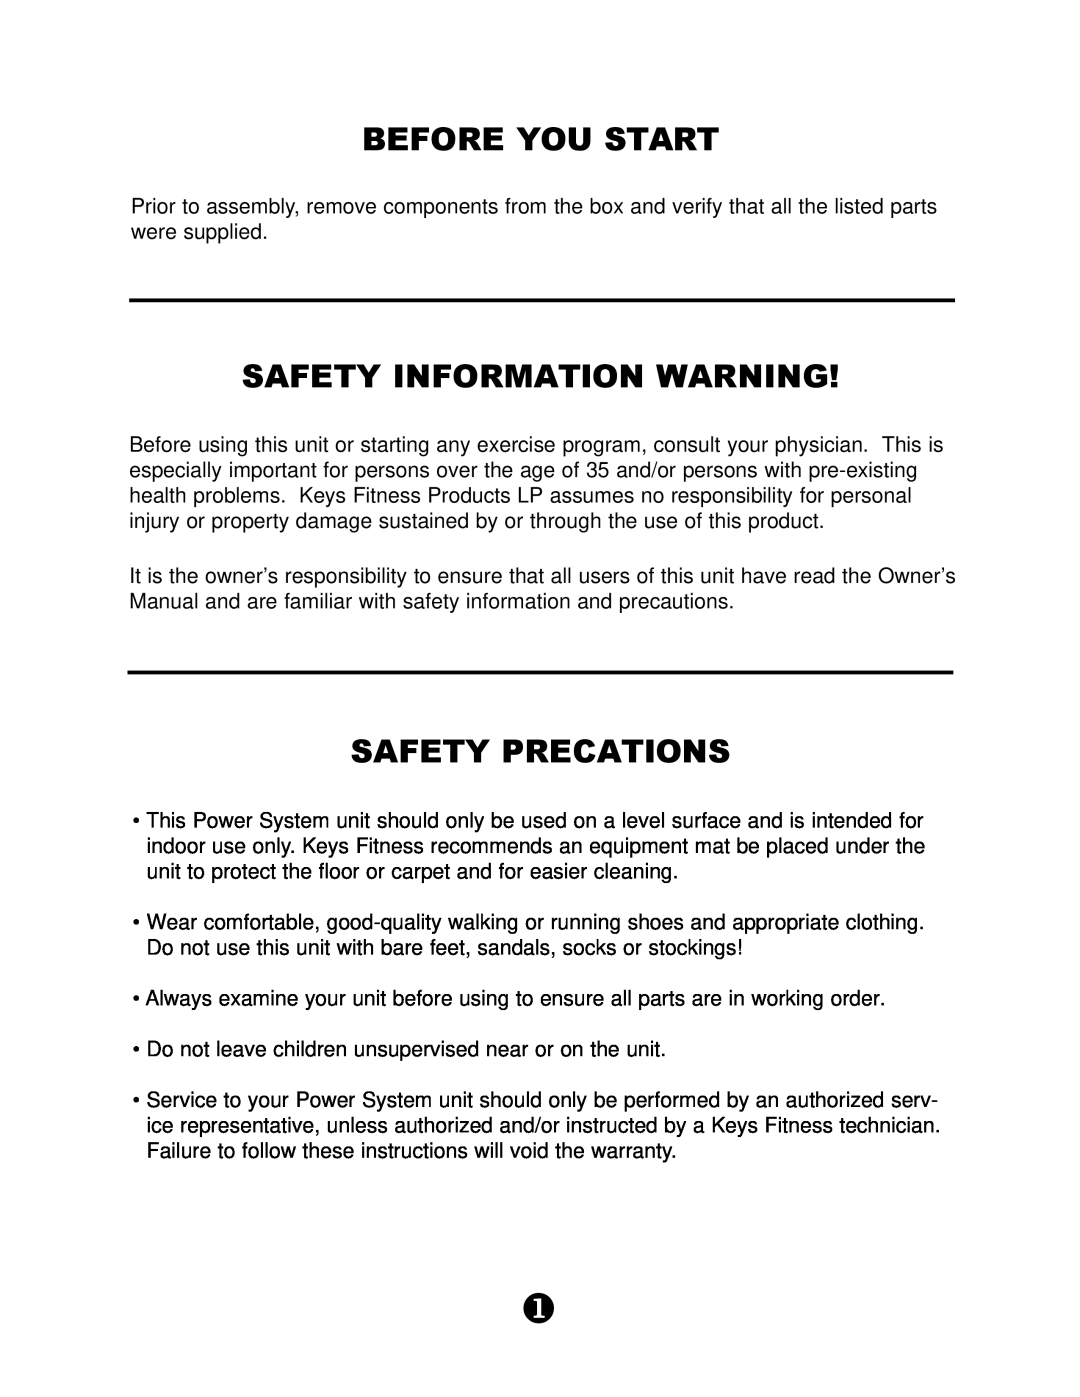 Keys Fitness KPS-CG owner manual Before You Start, Safety Information Warning, Safety Precations 